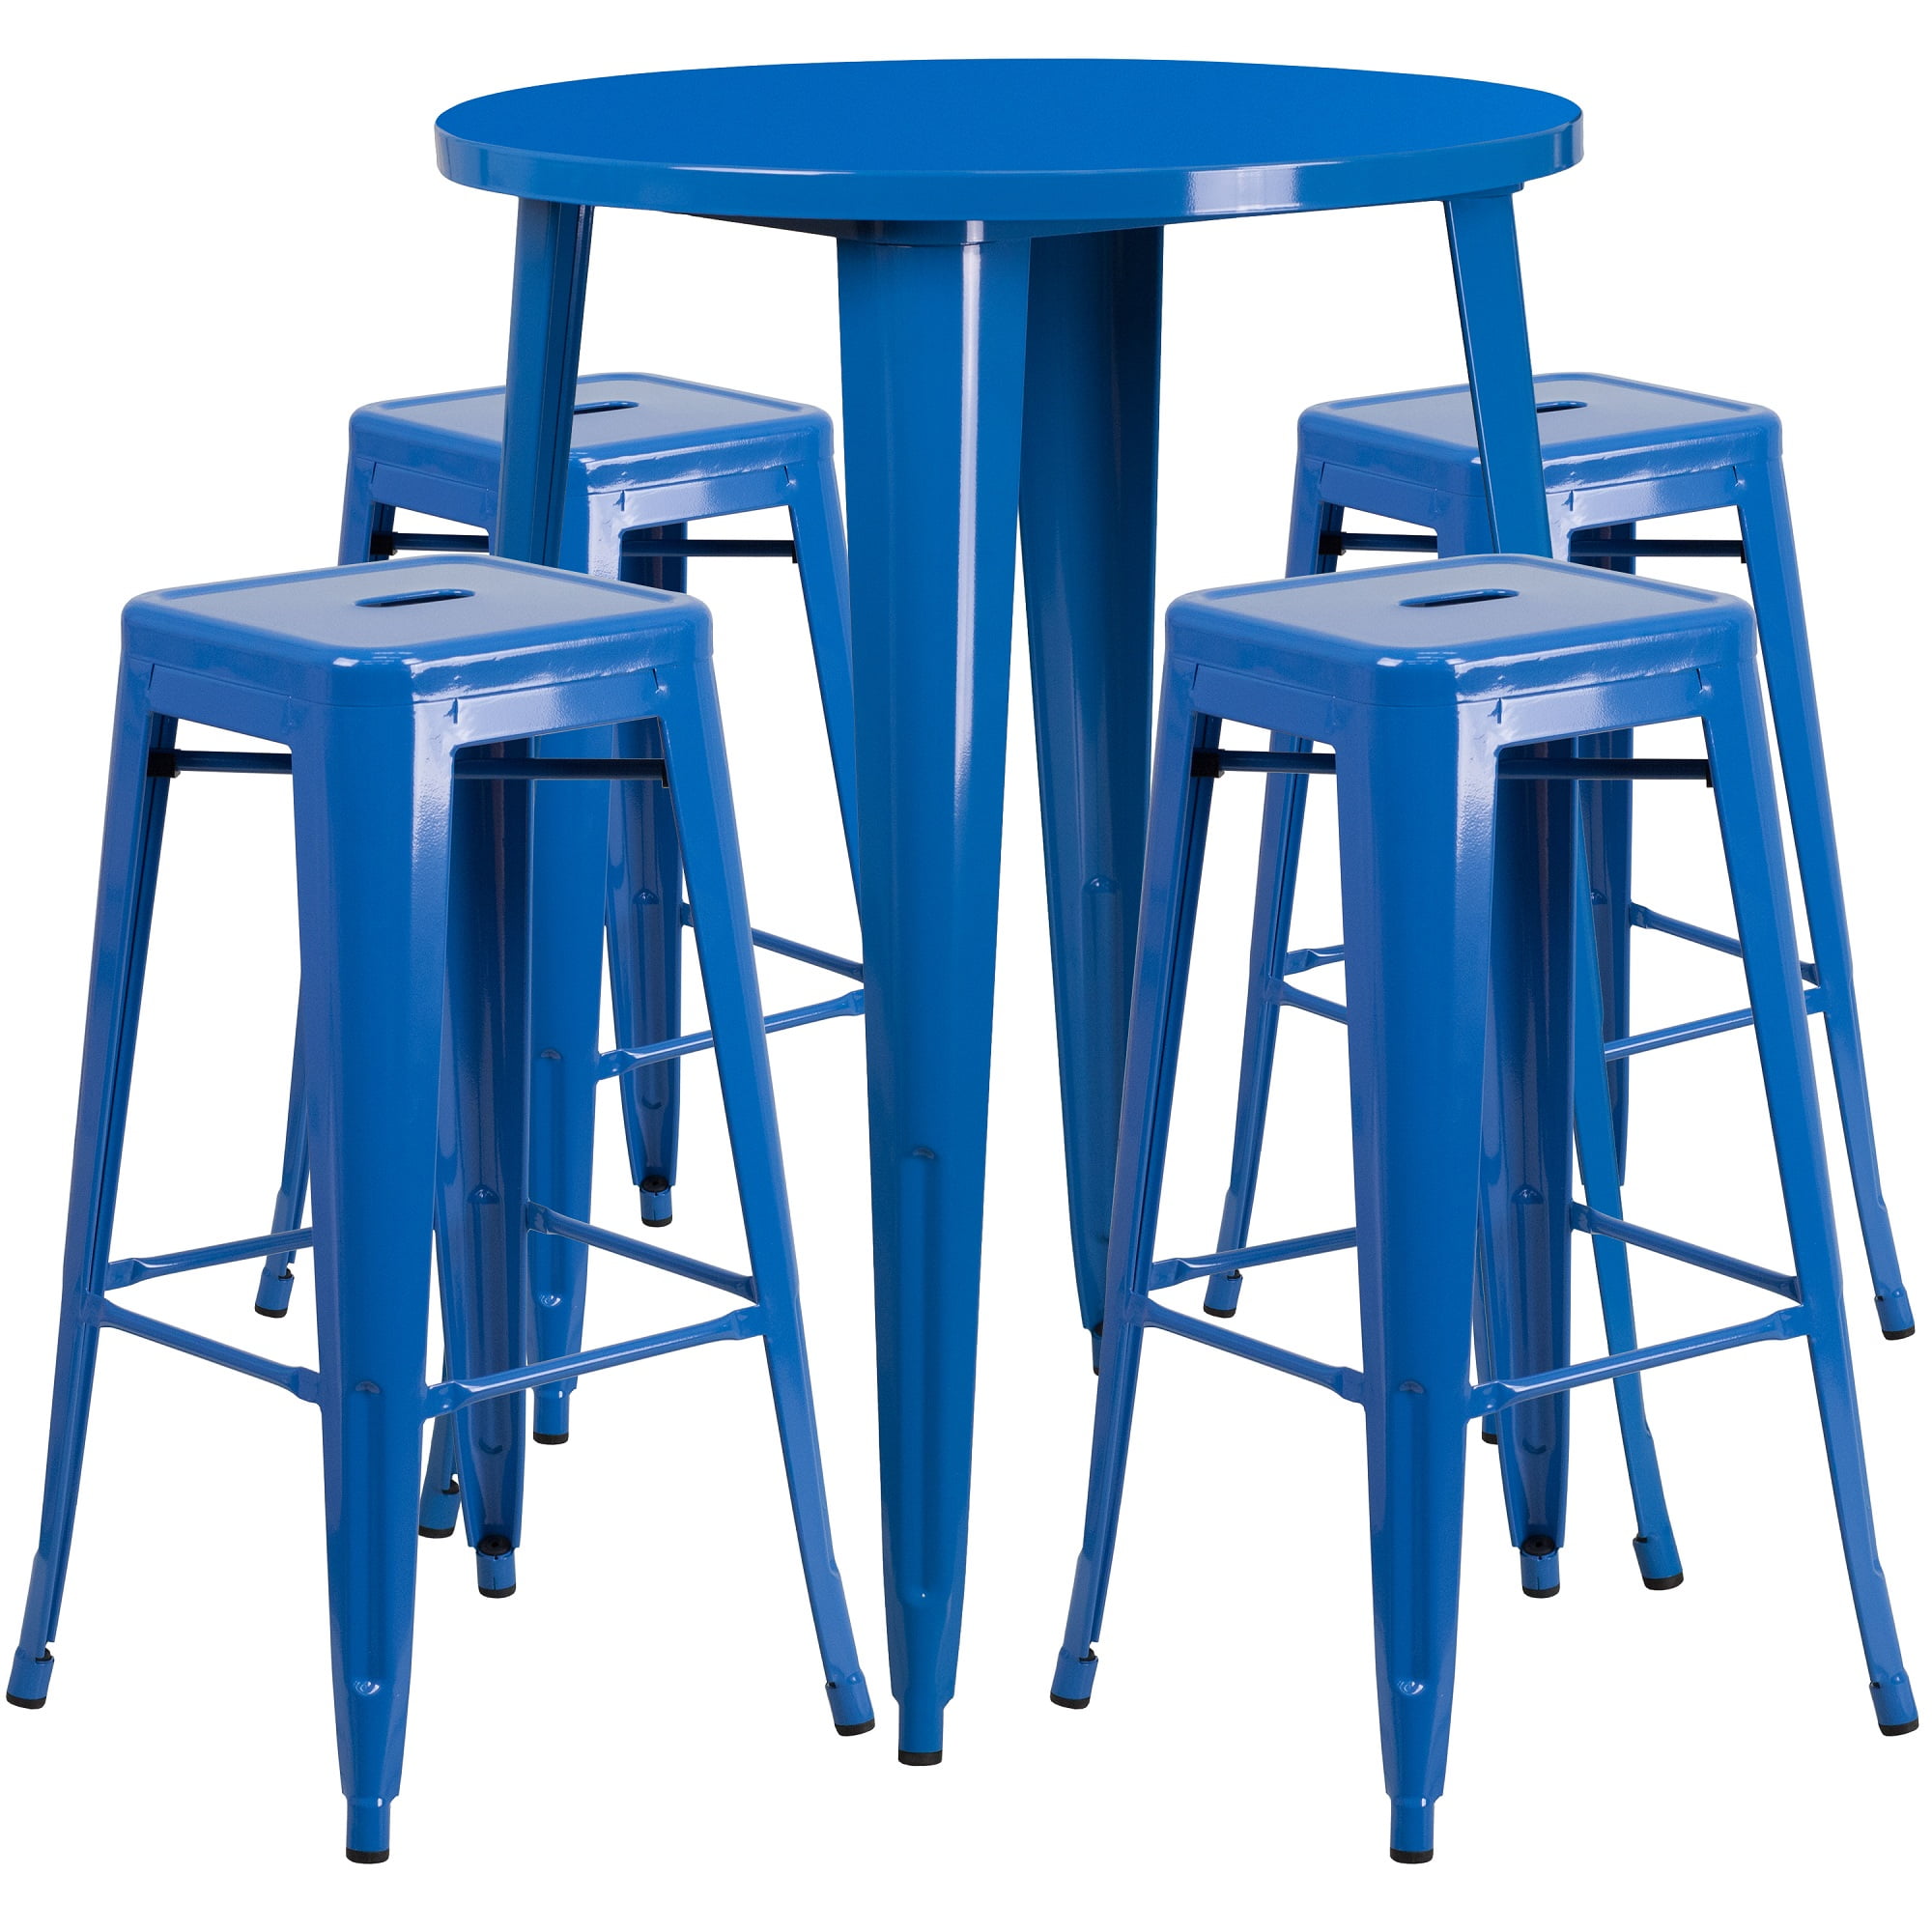 Set of 5 Blue Round Metal Indoor or Outdoor Bar Height Table and Square Seat Backless Stools Set 41&rdquo;